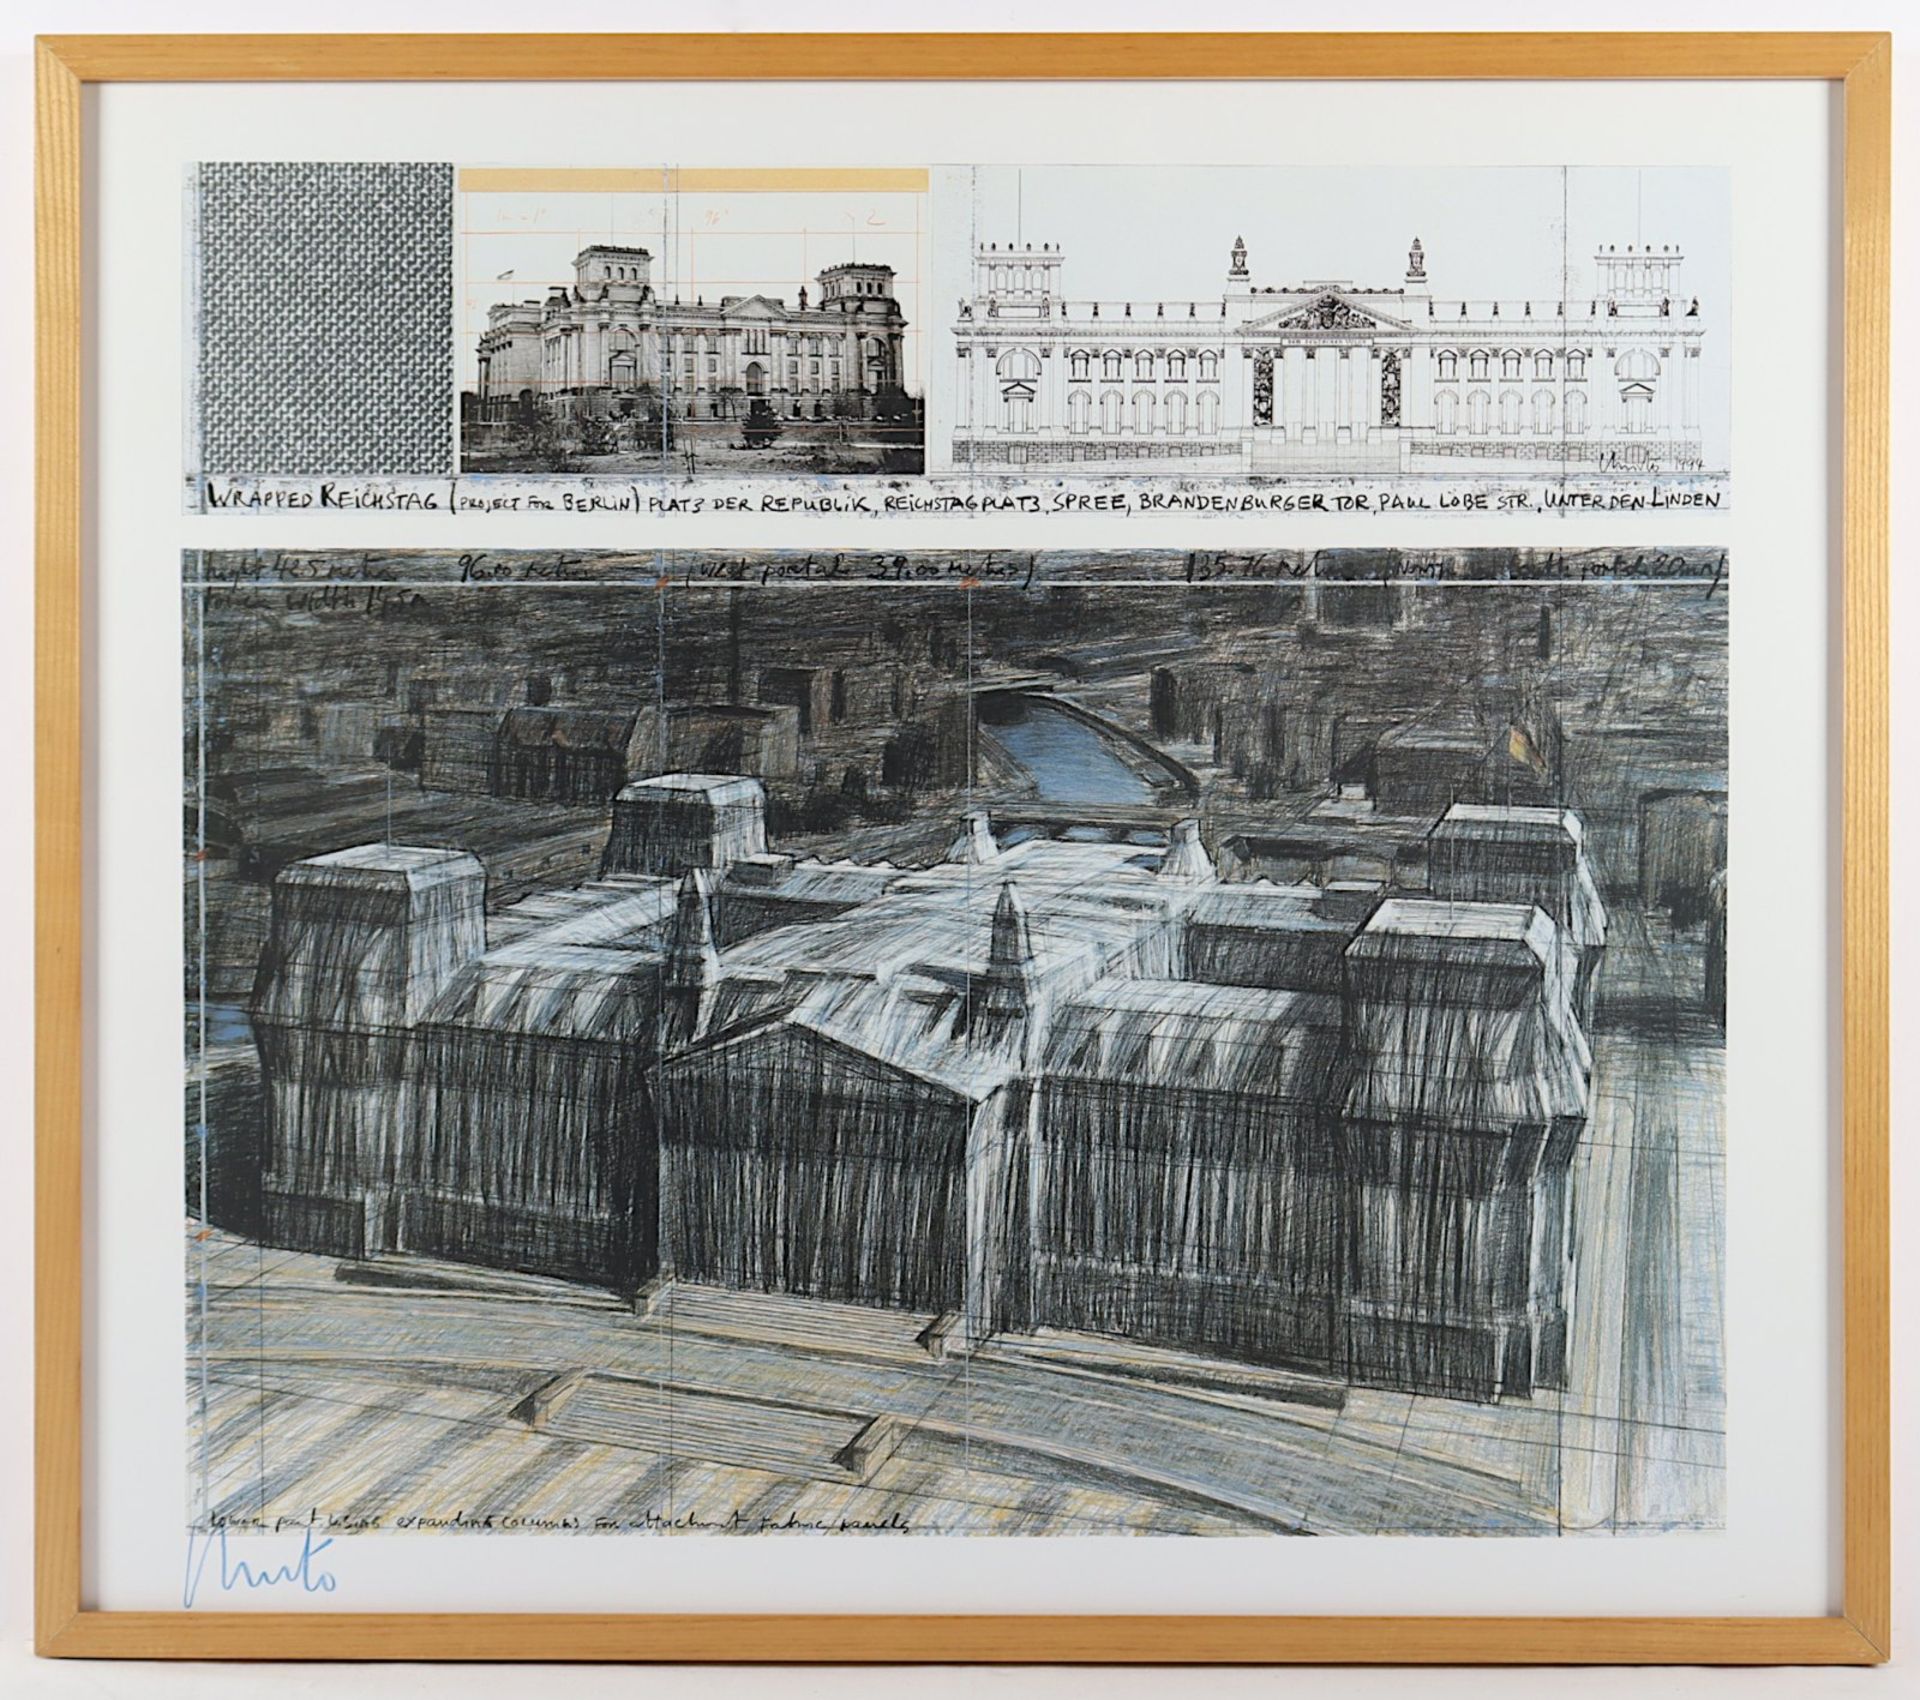 CHRISTO, "Wrapped Reichstag",